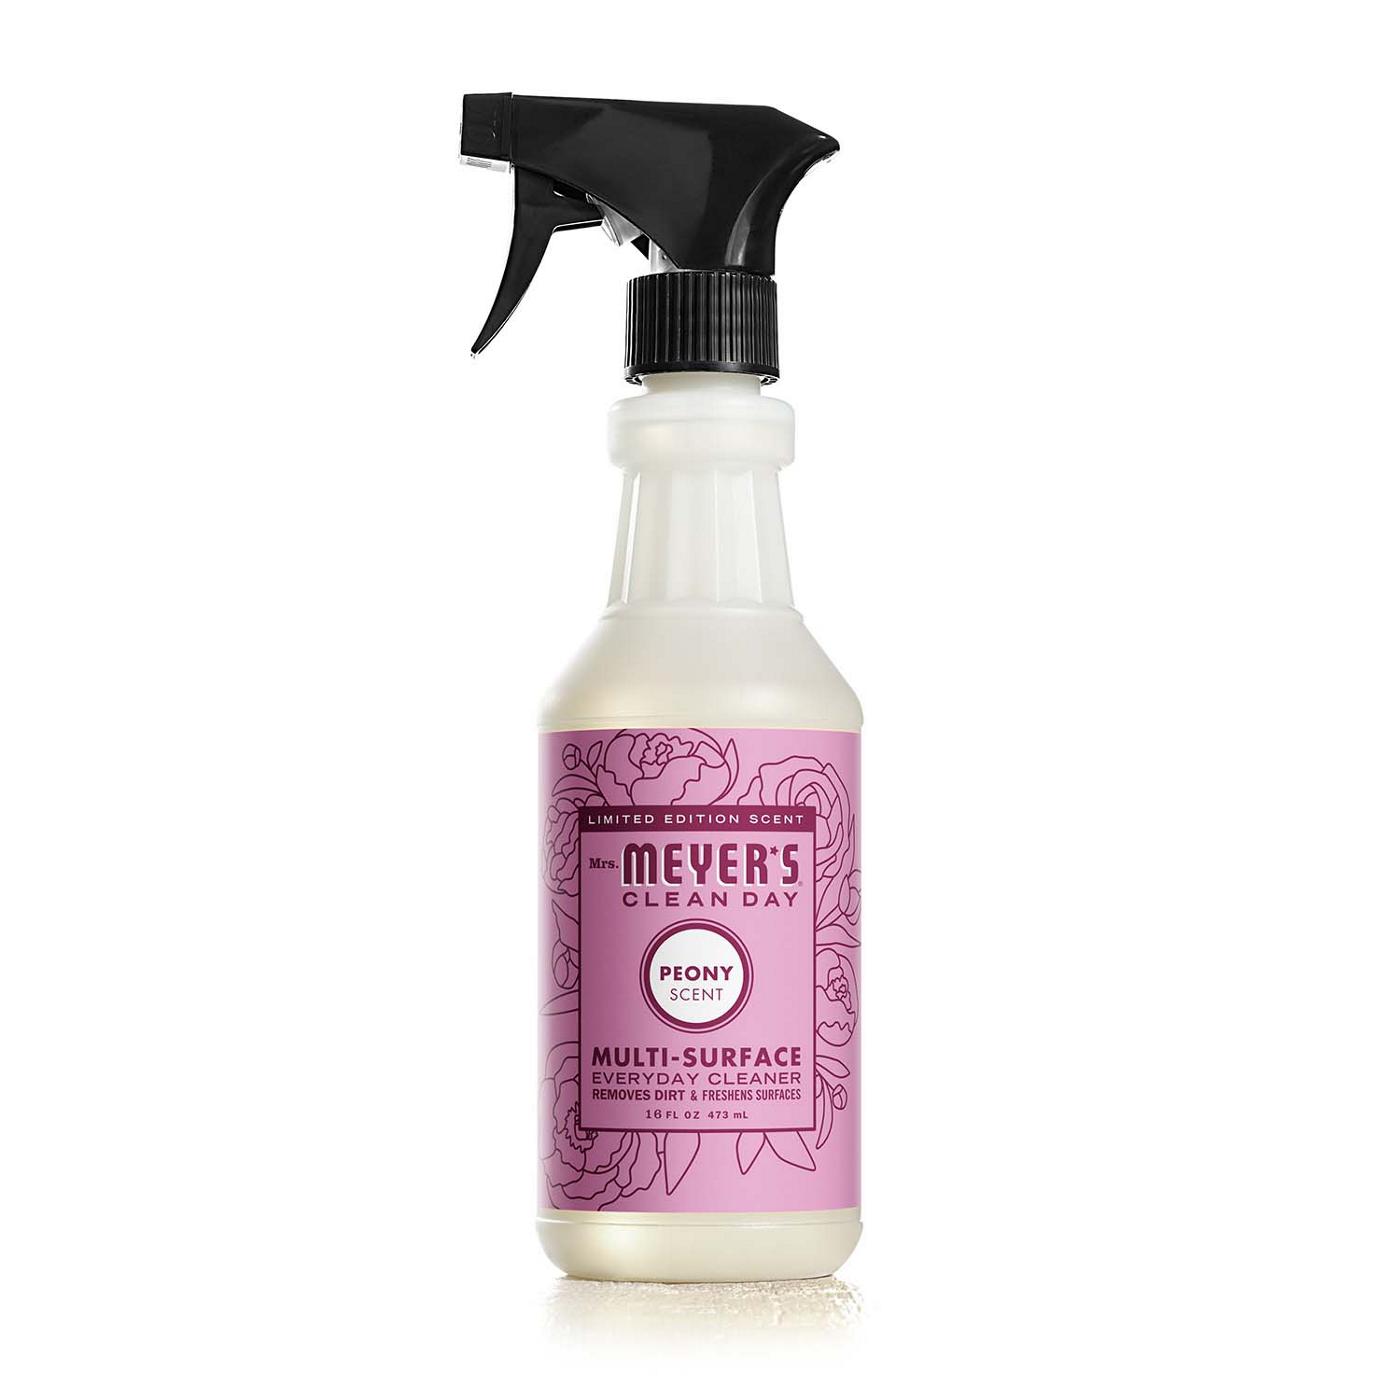 Mrs. Meyer's Clean Day Peony Scent Multi-Surface Everyday Cleaner Spray; image 1 of 6